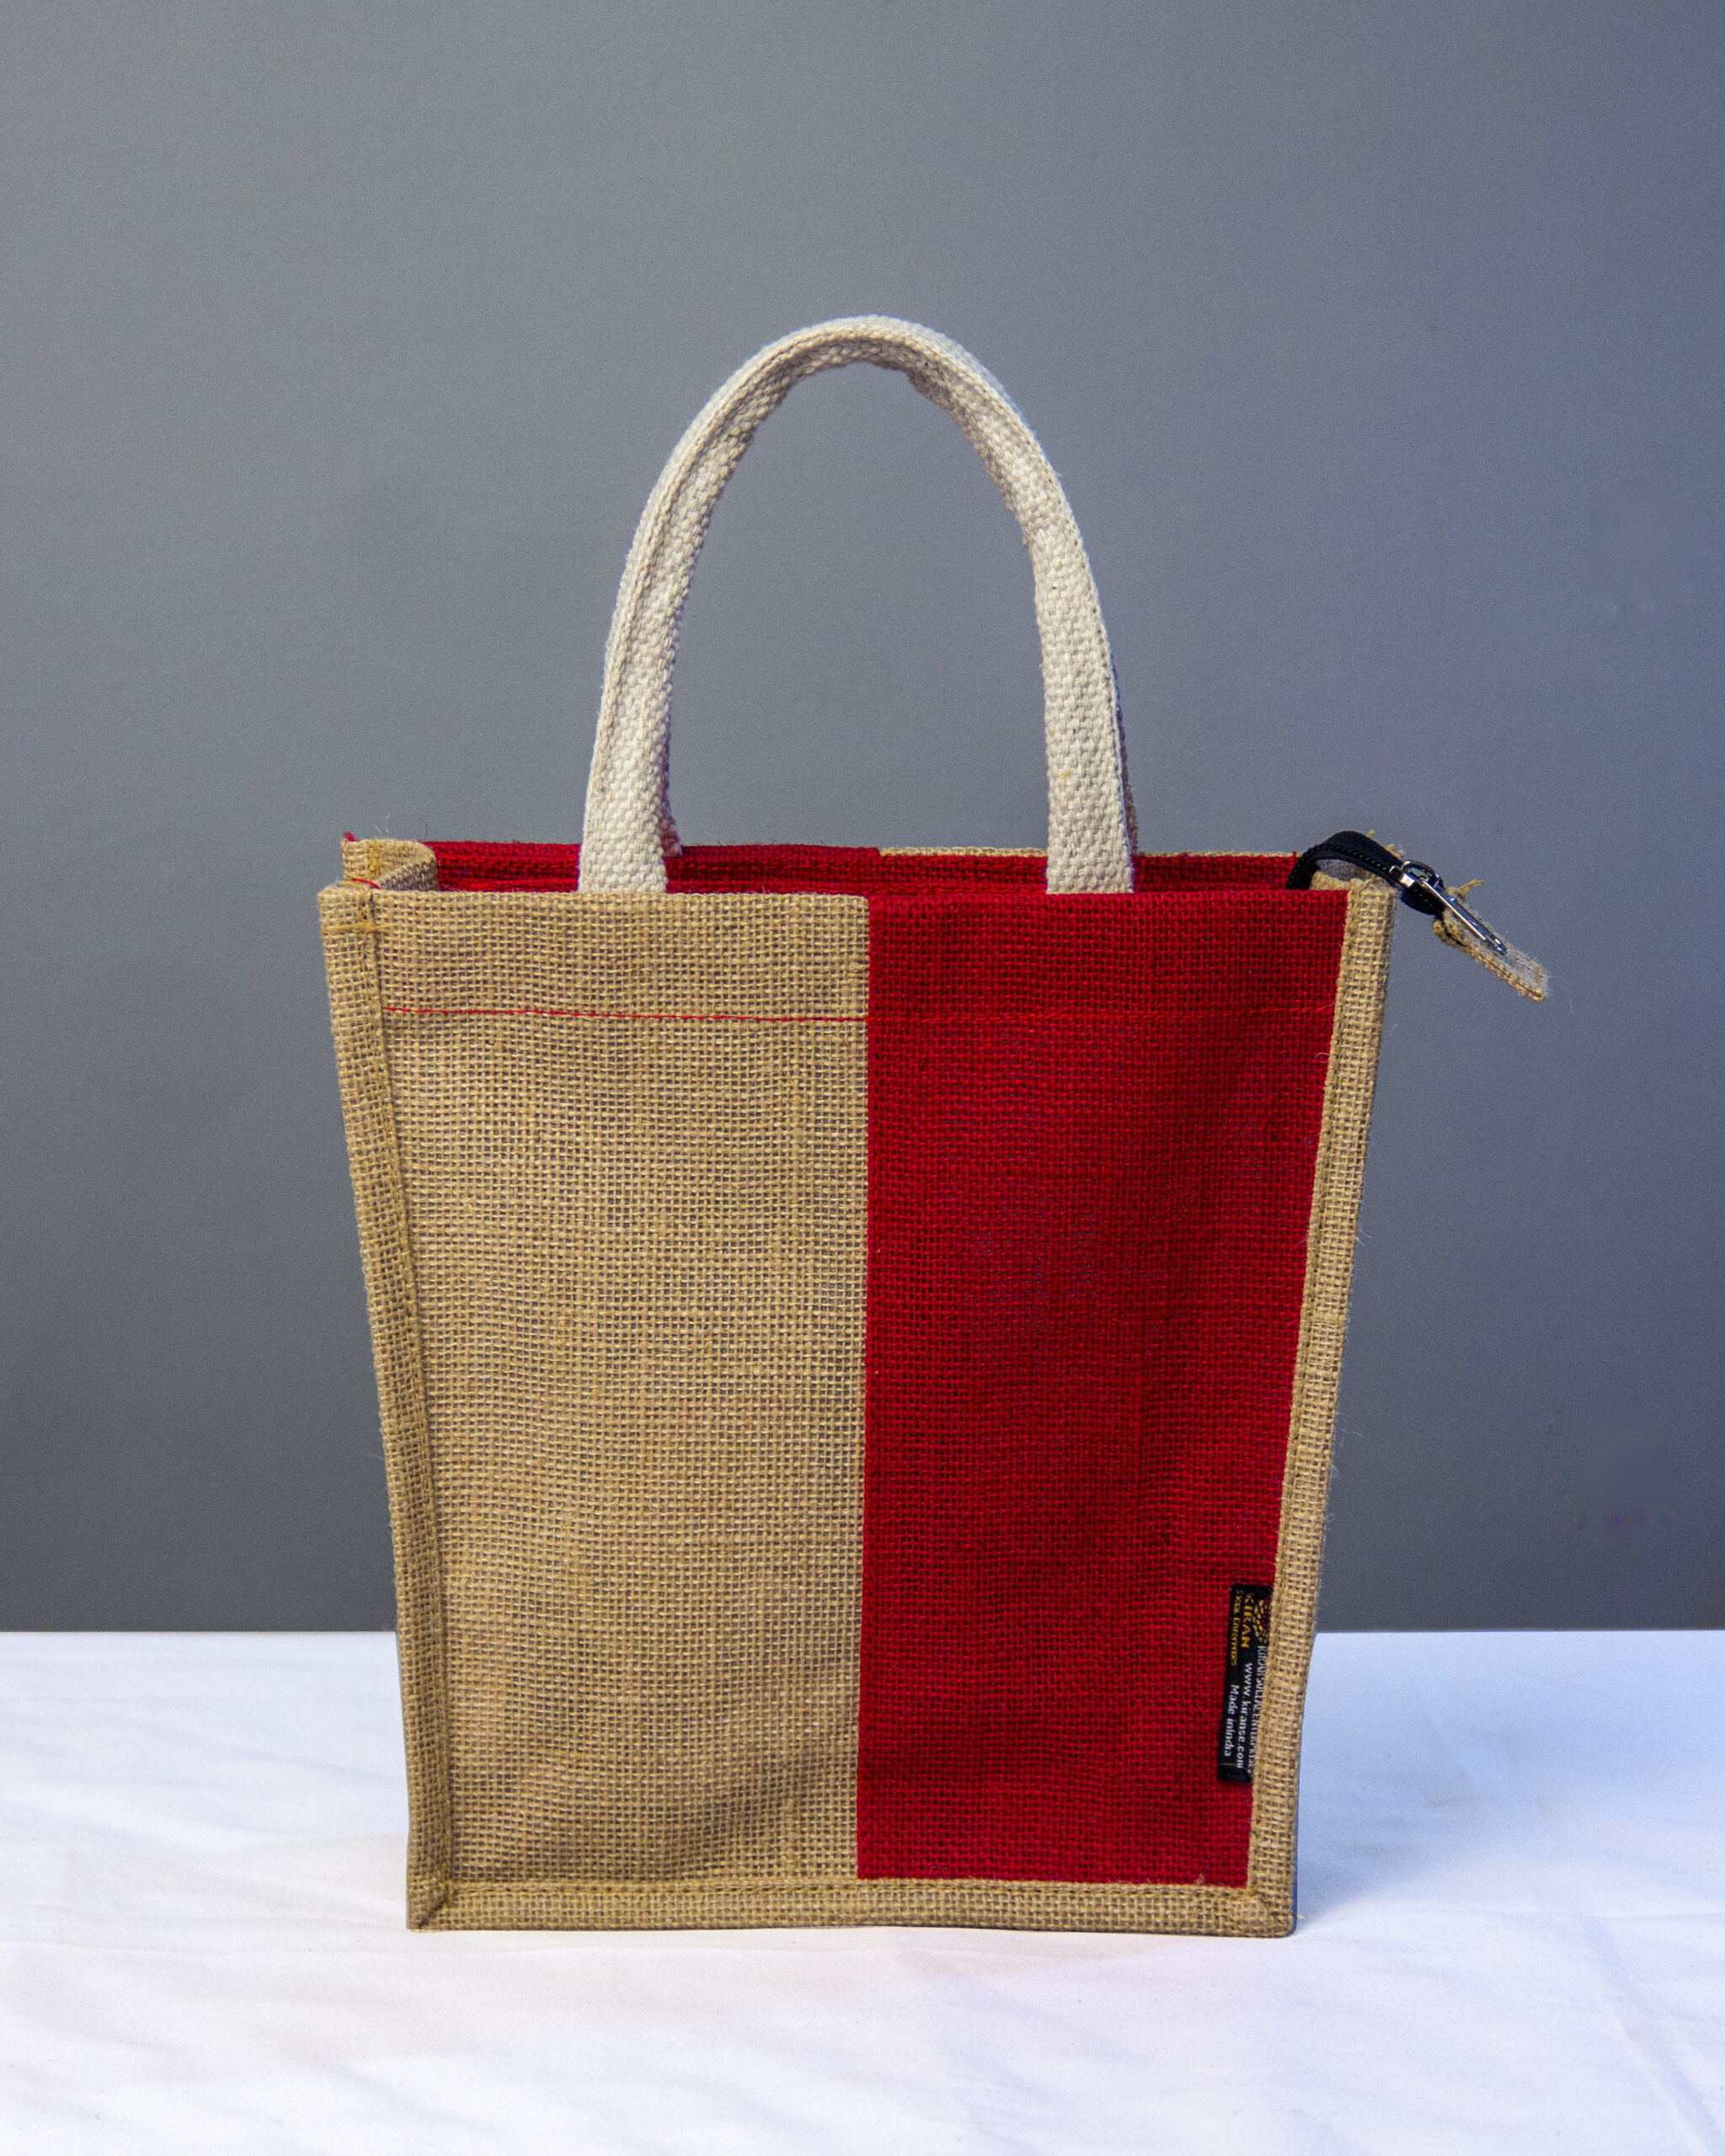 Recycled Cloth & Jute Tote Bag, Hand woven Yellow Braided Striped Bag